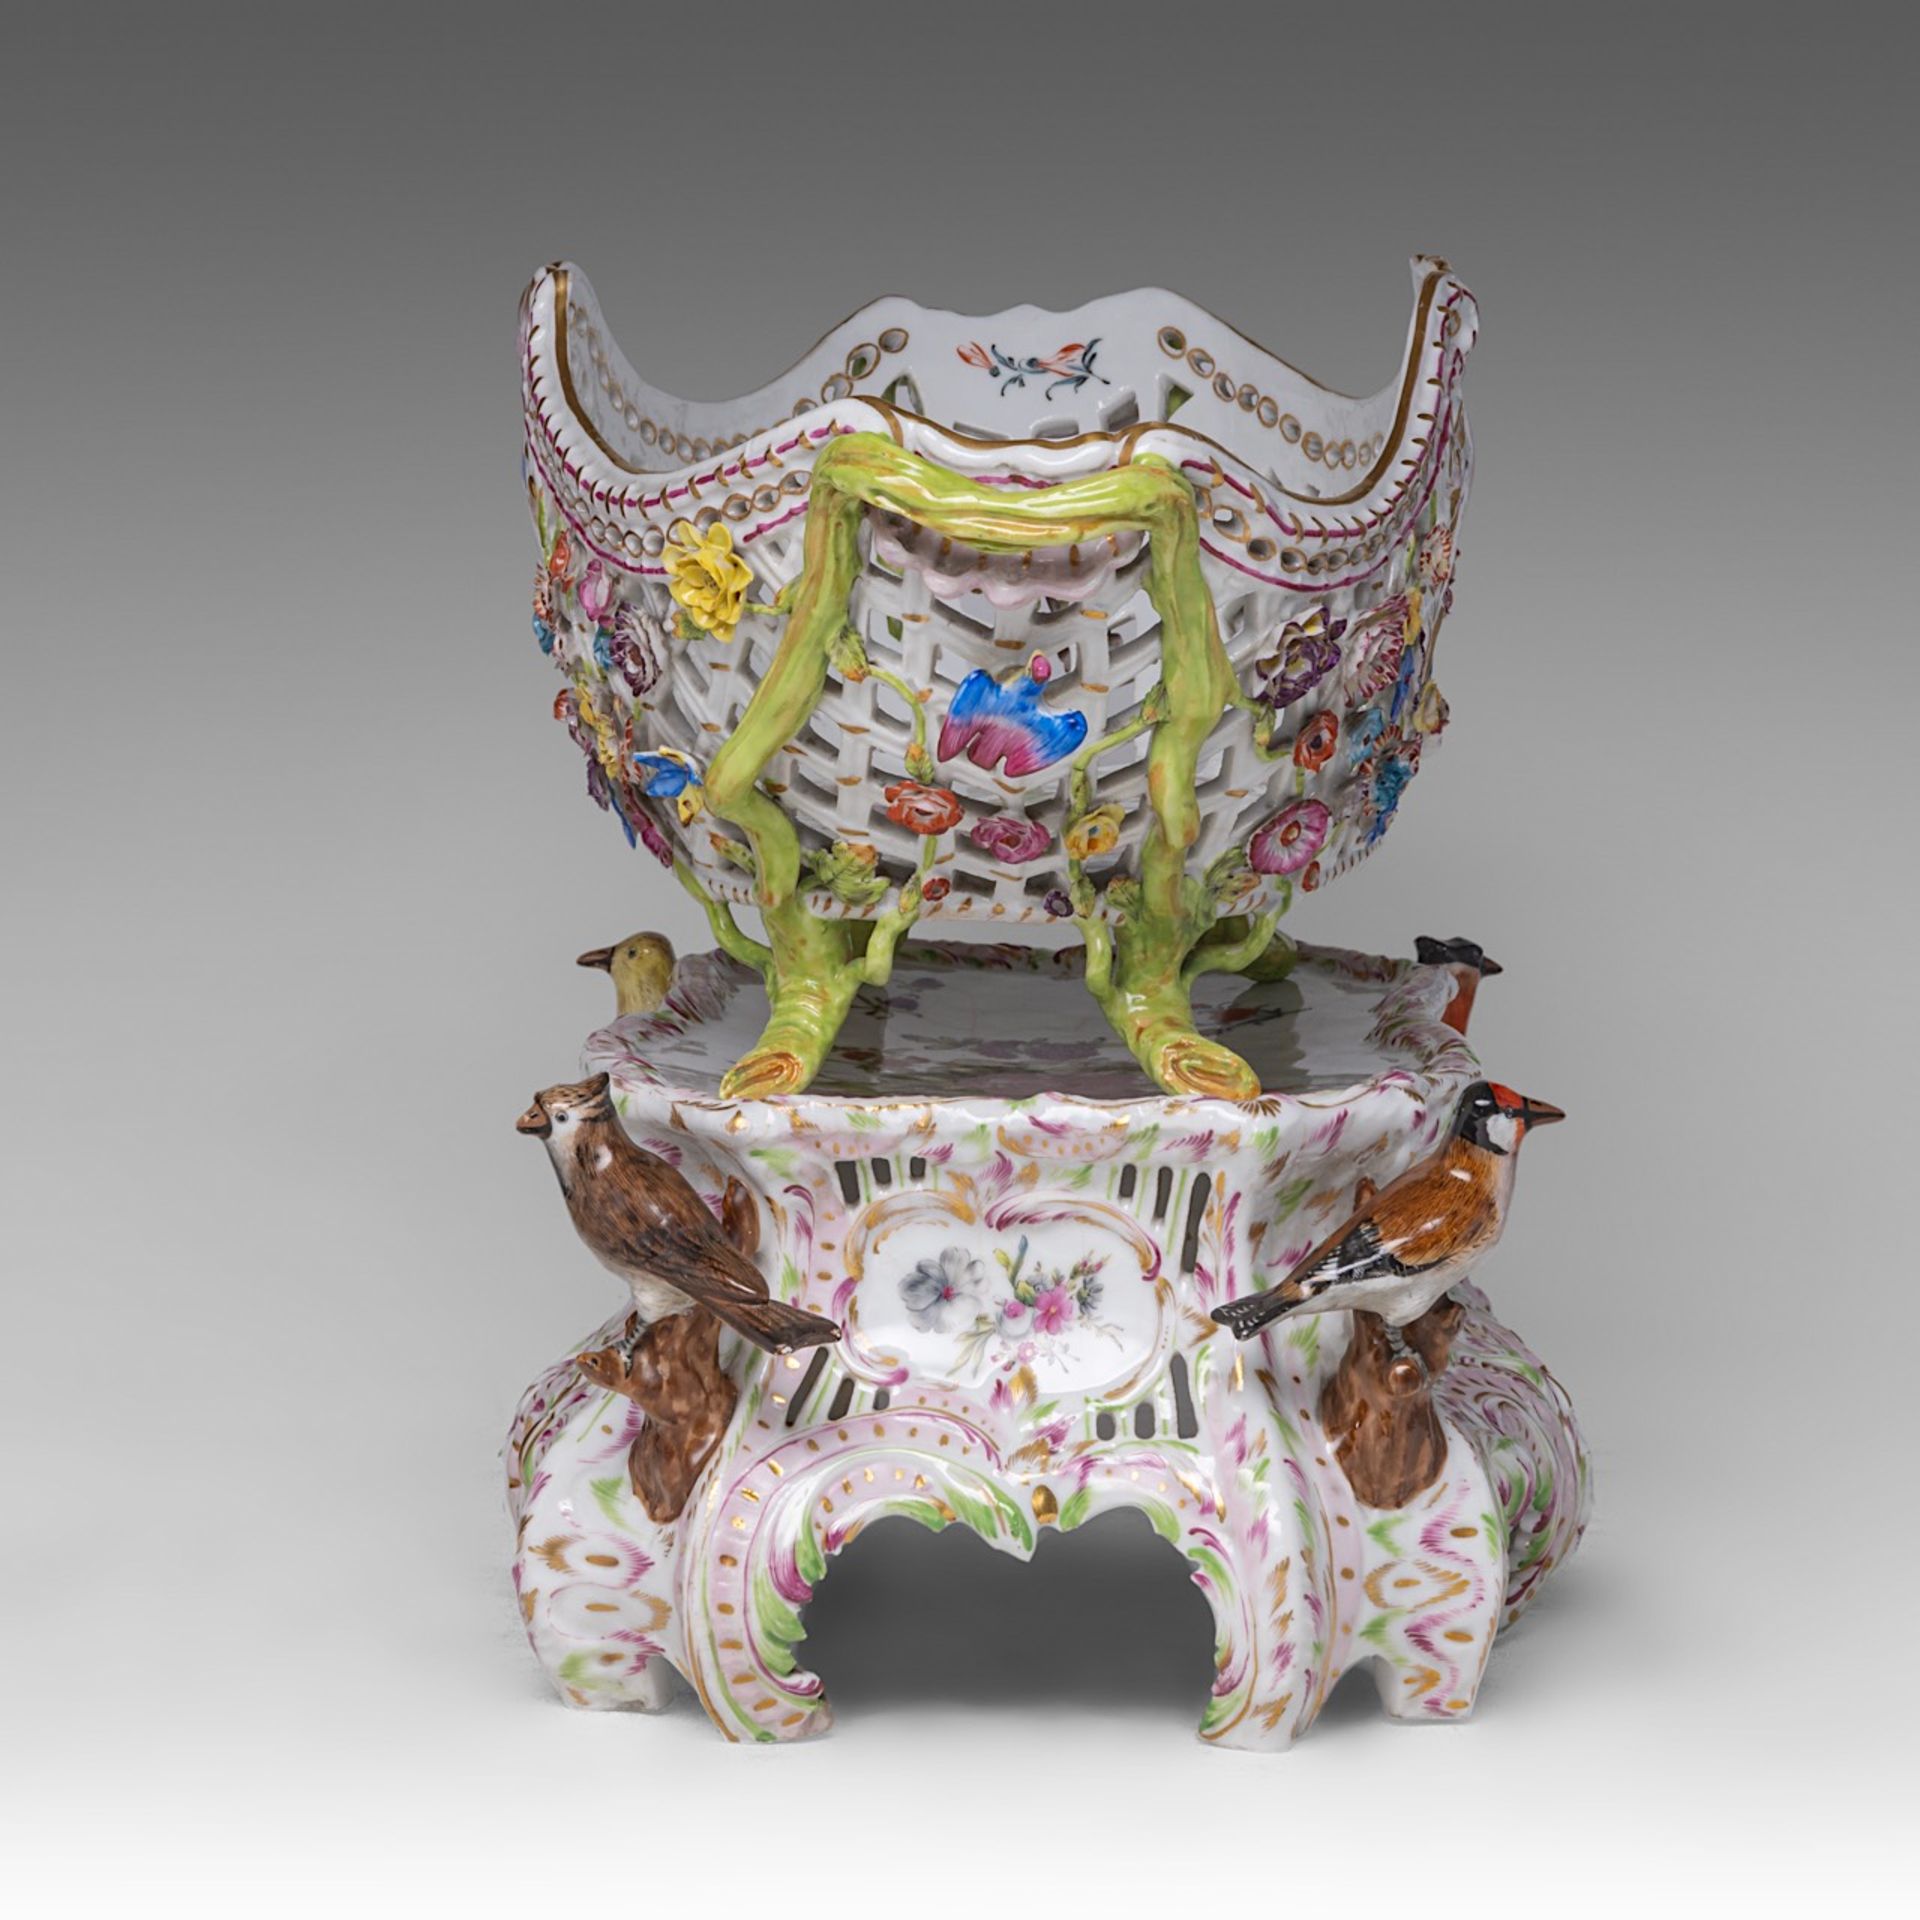 A polychrome Saxony porcelain basket on stand, decorated with modelled birds and flowers, H 33 - W 4 - Bild 5 aus 12